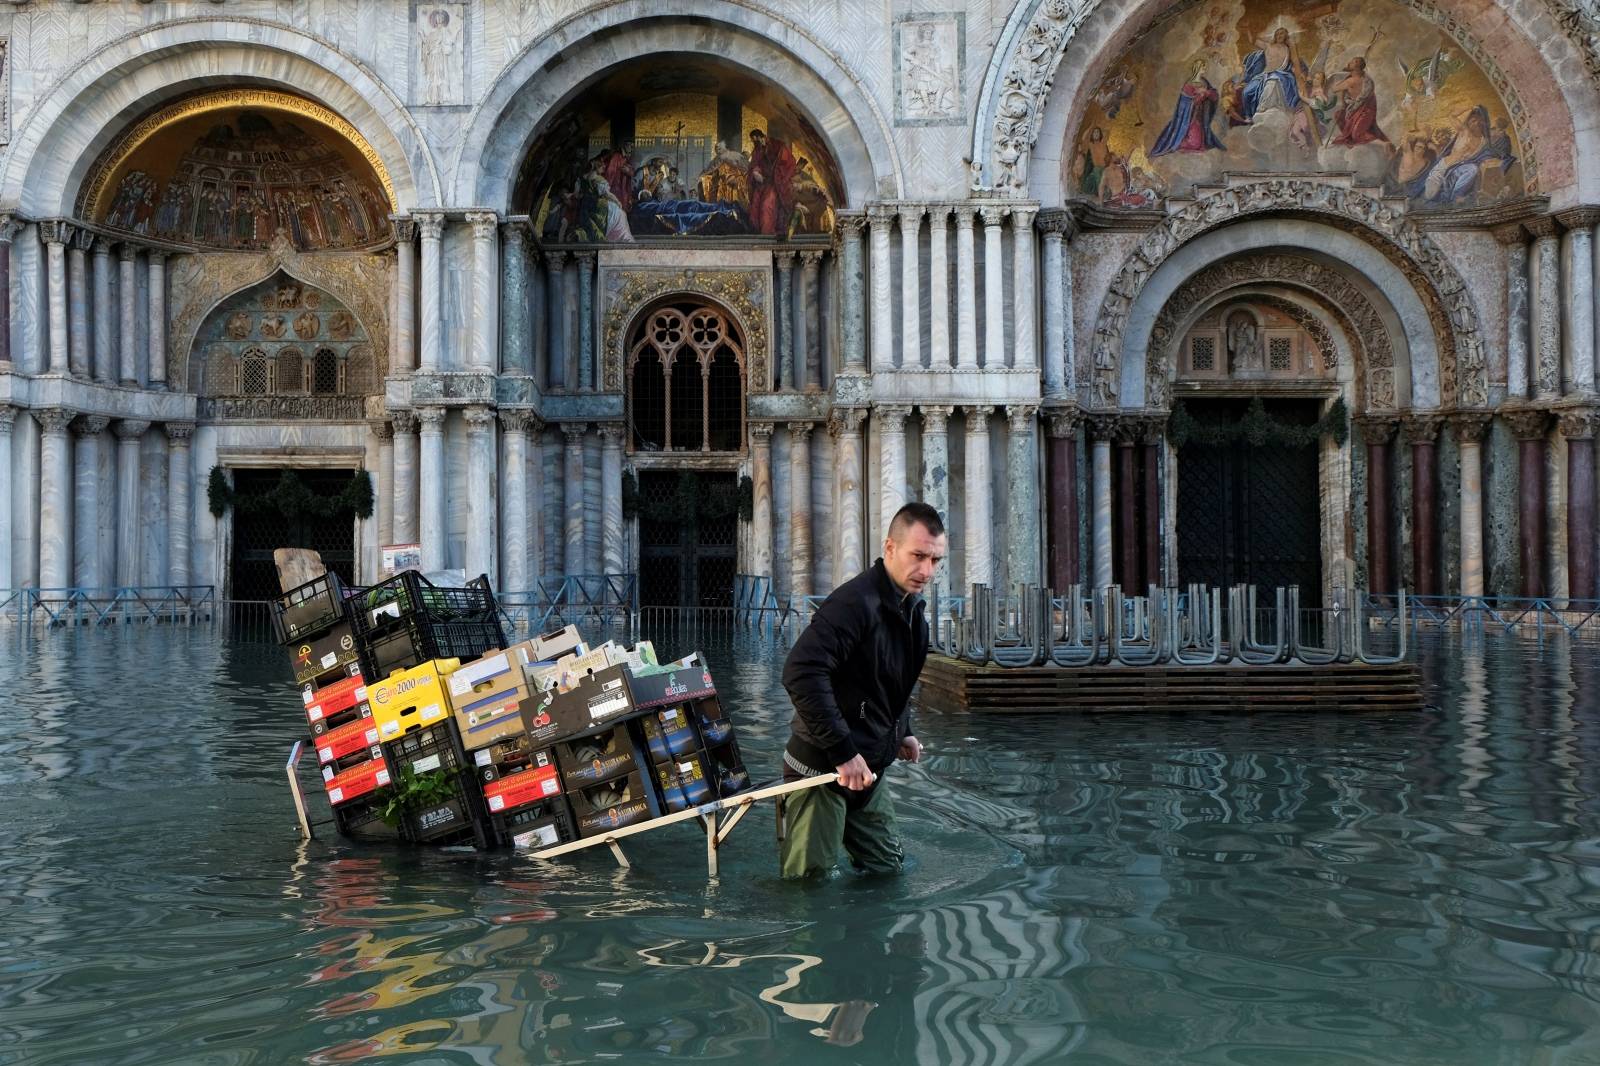 A man pulls a cart carrying fruits and vegetables through a flooded St. Mark's Square during high tide in Venice